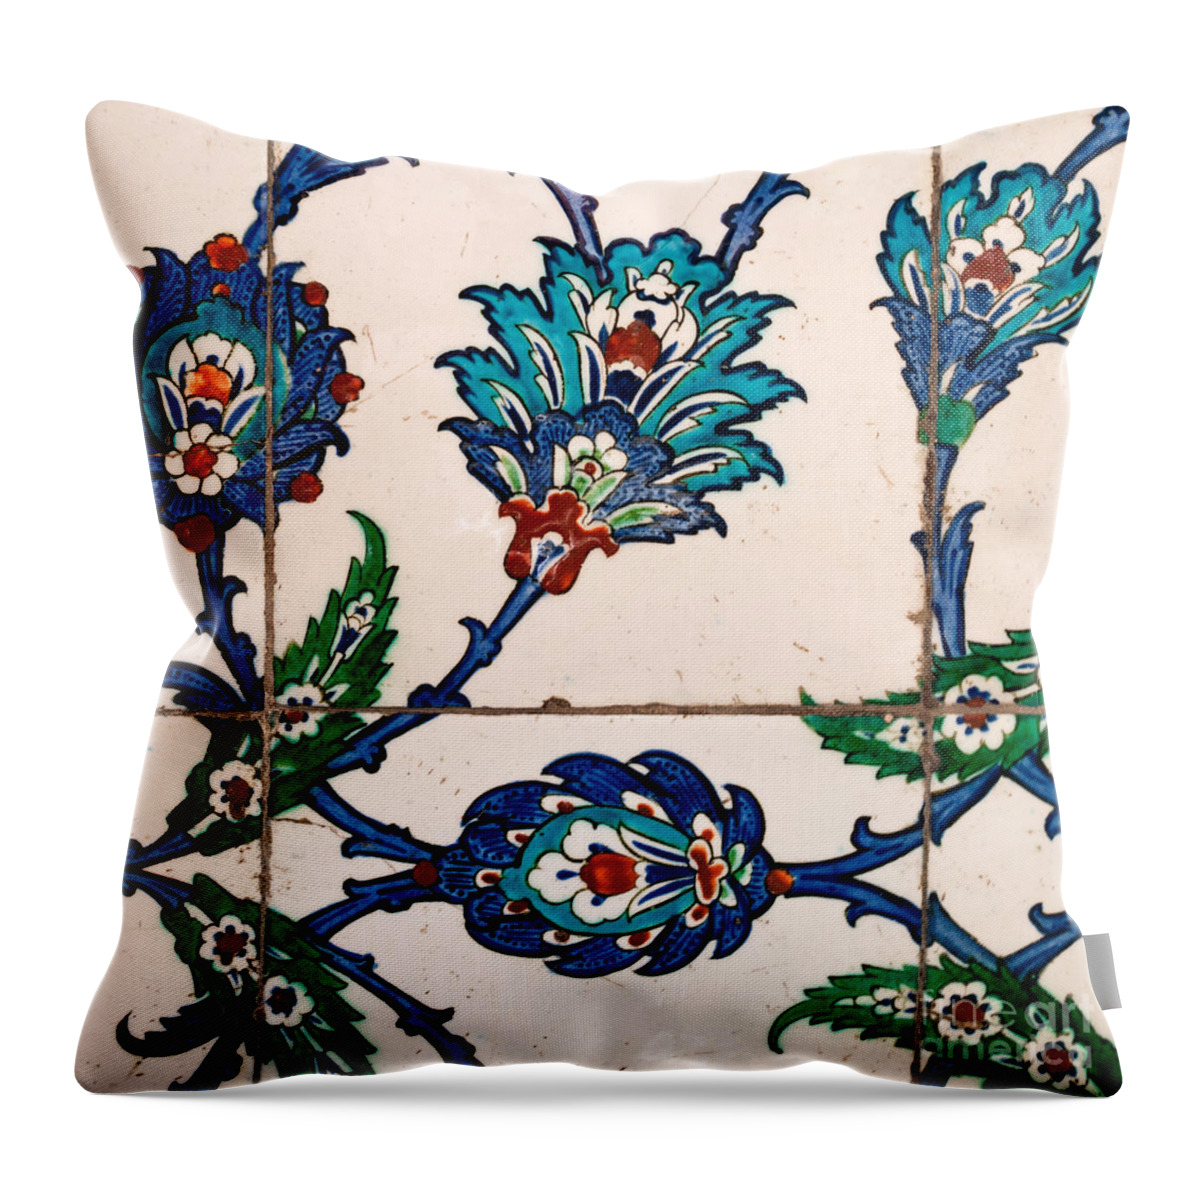 Istanbul Throw Pillow featuring the photograph Iznik 22 by Rick Piper Photography